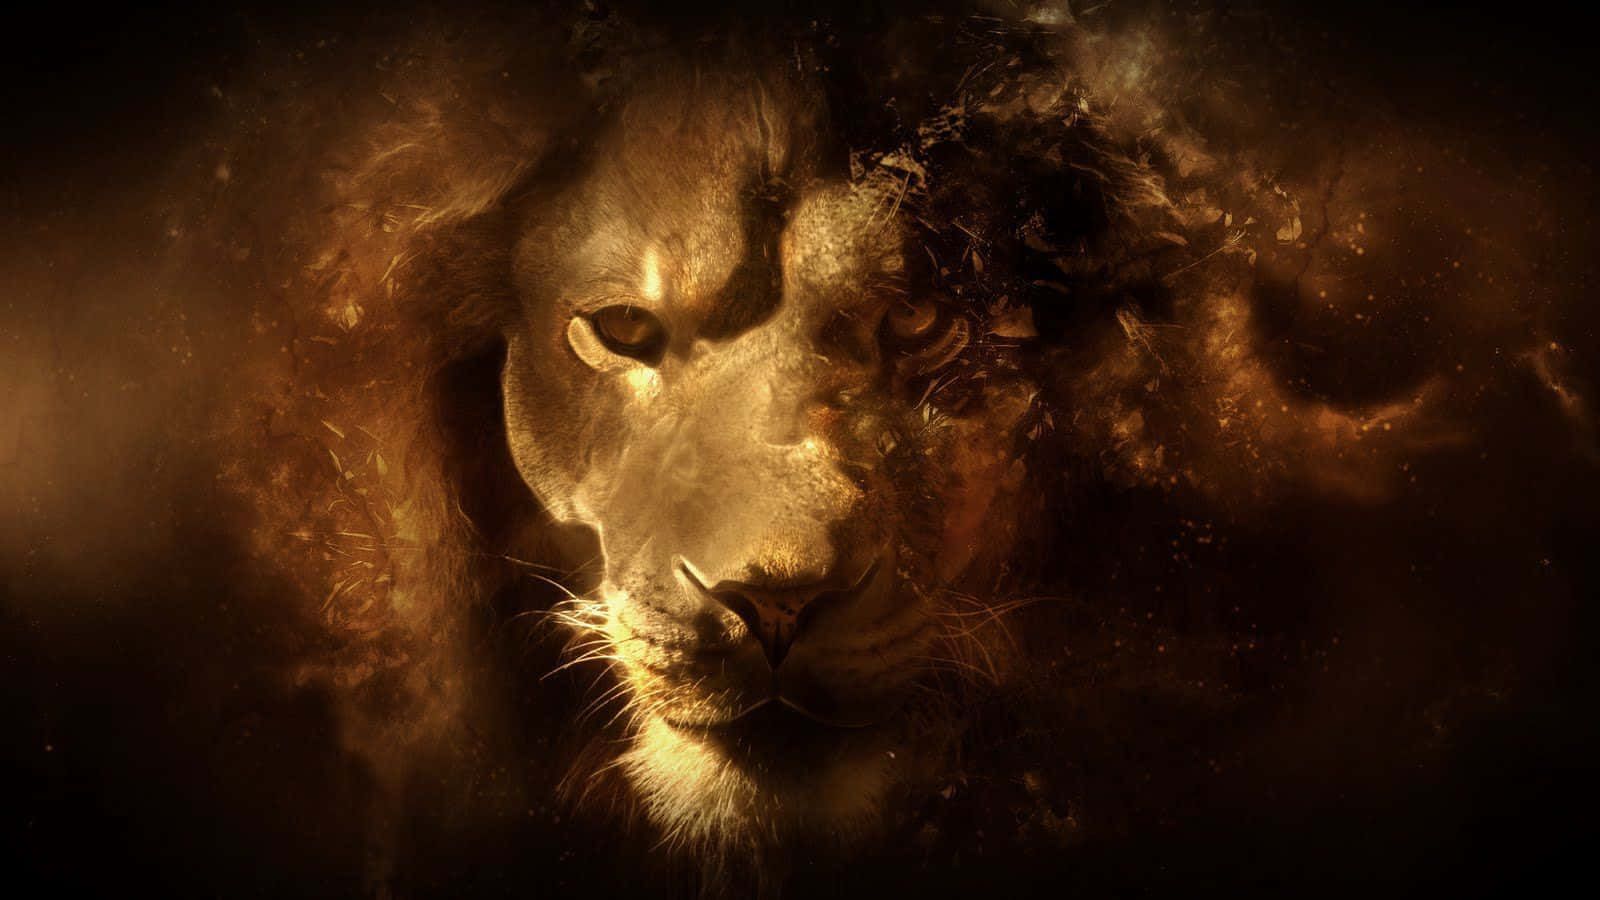 Roar Into The Distance - An Abstract Lion Wallpaper